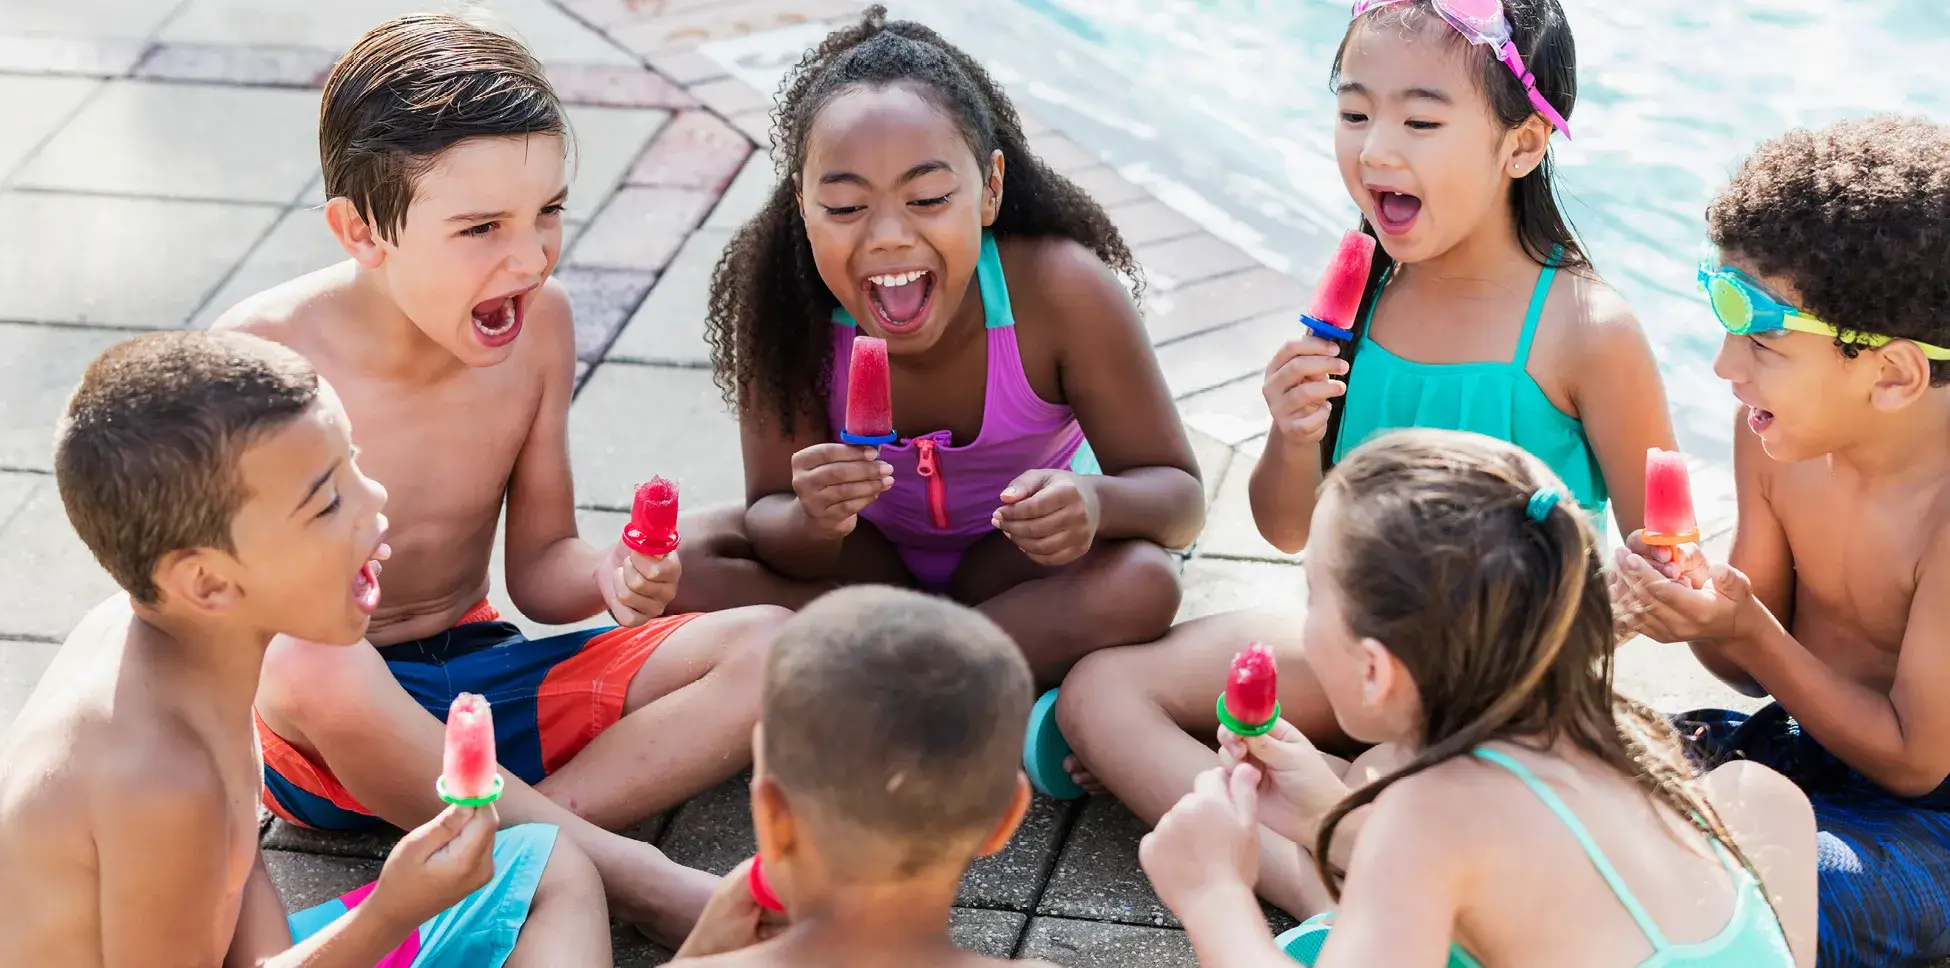 How to Plan a Vacation with Children That Everyone Will Enjoy